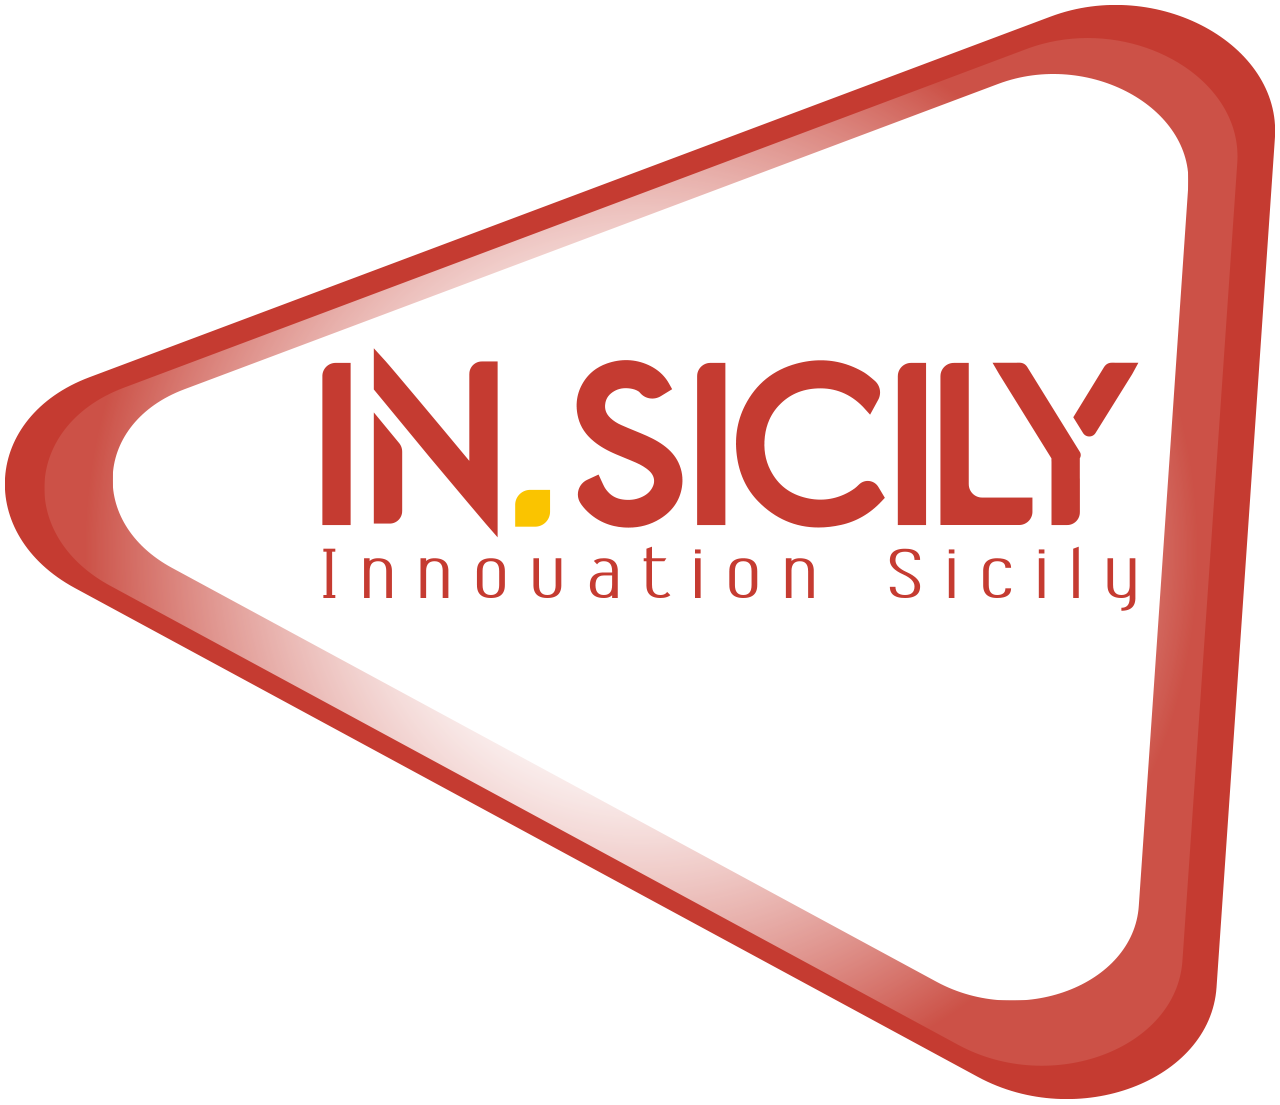 IN.SICILY - Innovation Sicily - Contacts